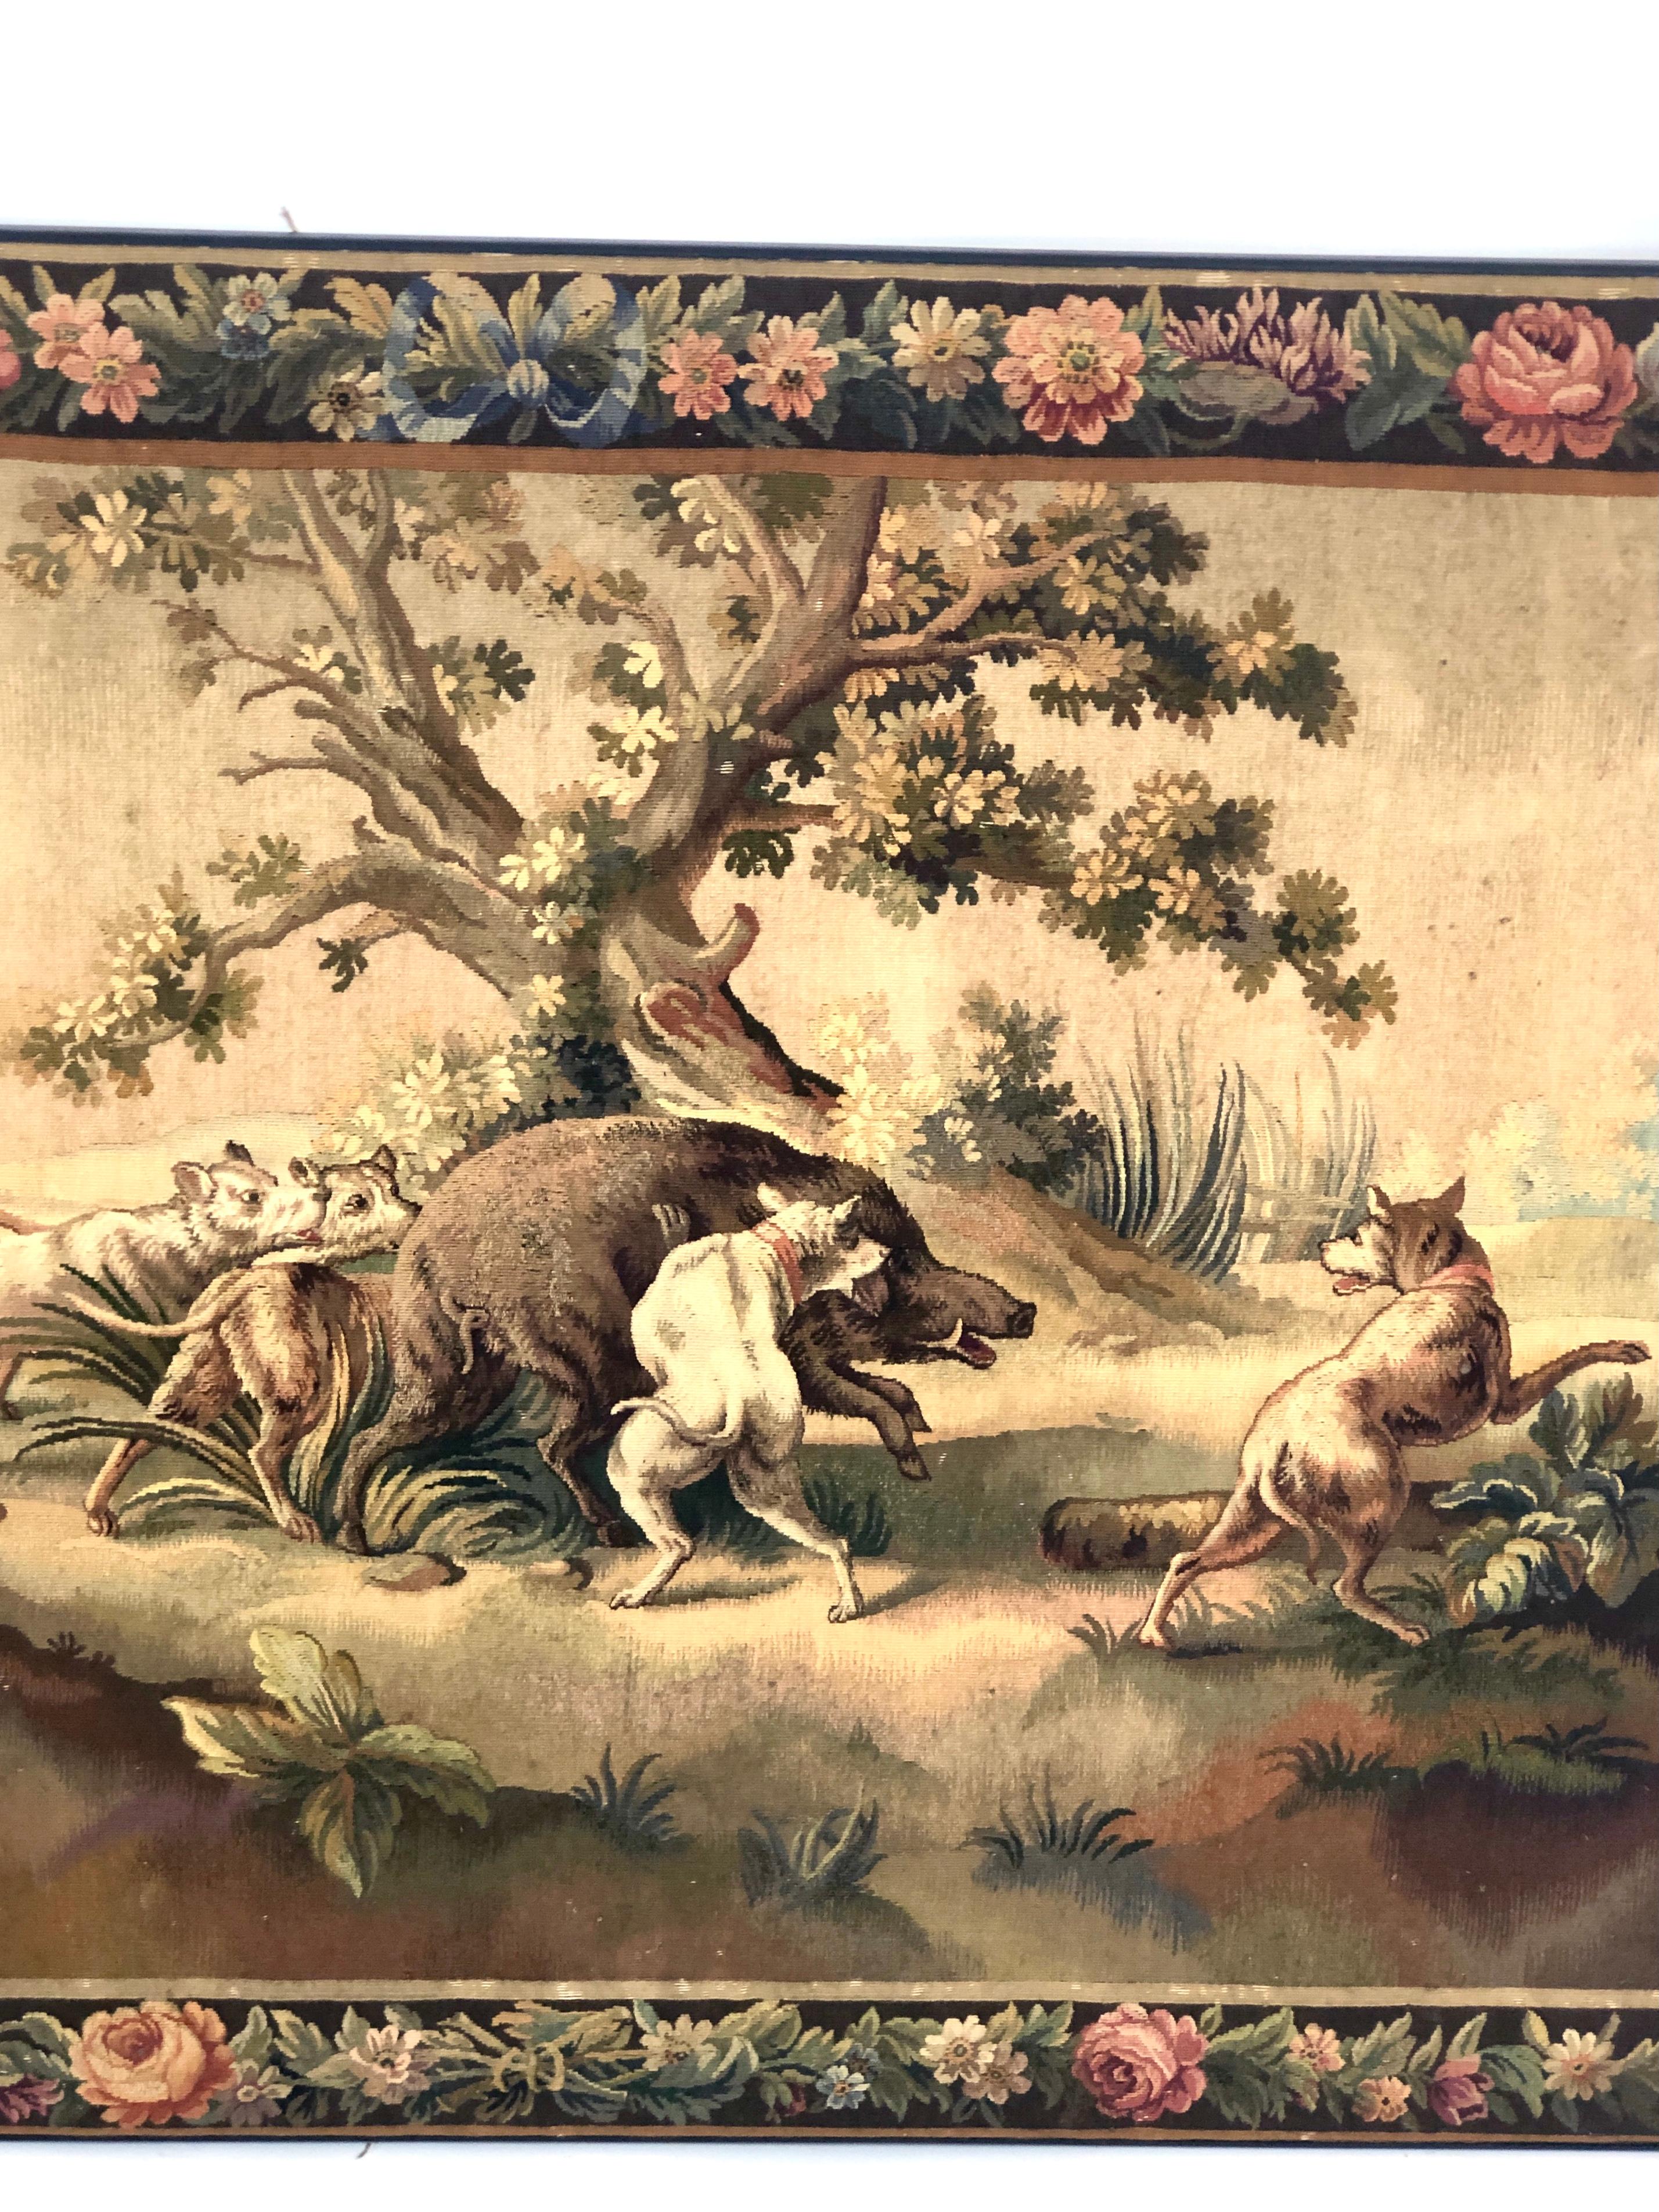 A fine Aubusson pastoral tapestry depicting dogs hunting a wild boar in a typically rural landscape. The woven tapestry is signed “Aubusson” on its left side. Some small blemishes, in keeping with its age. 

The small French town of Aubusson, on